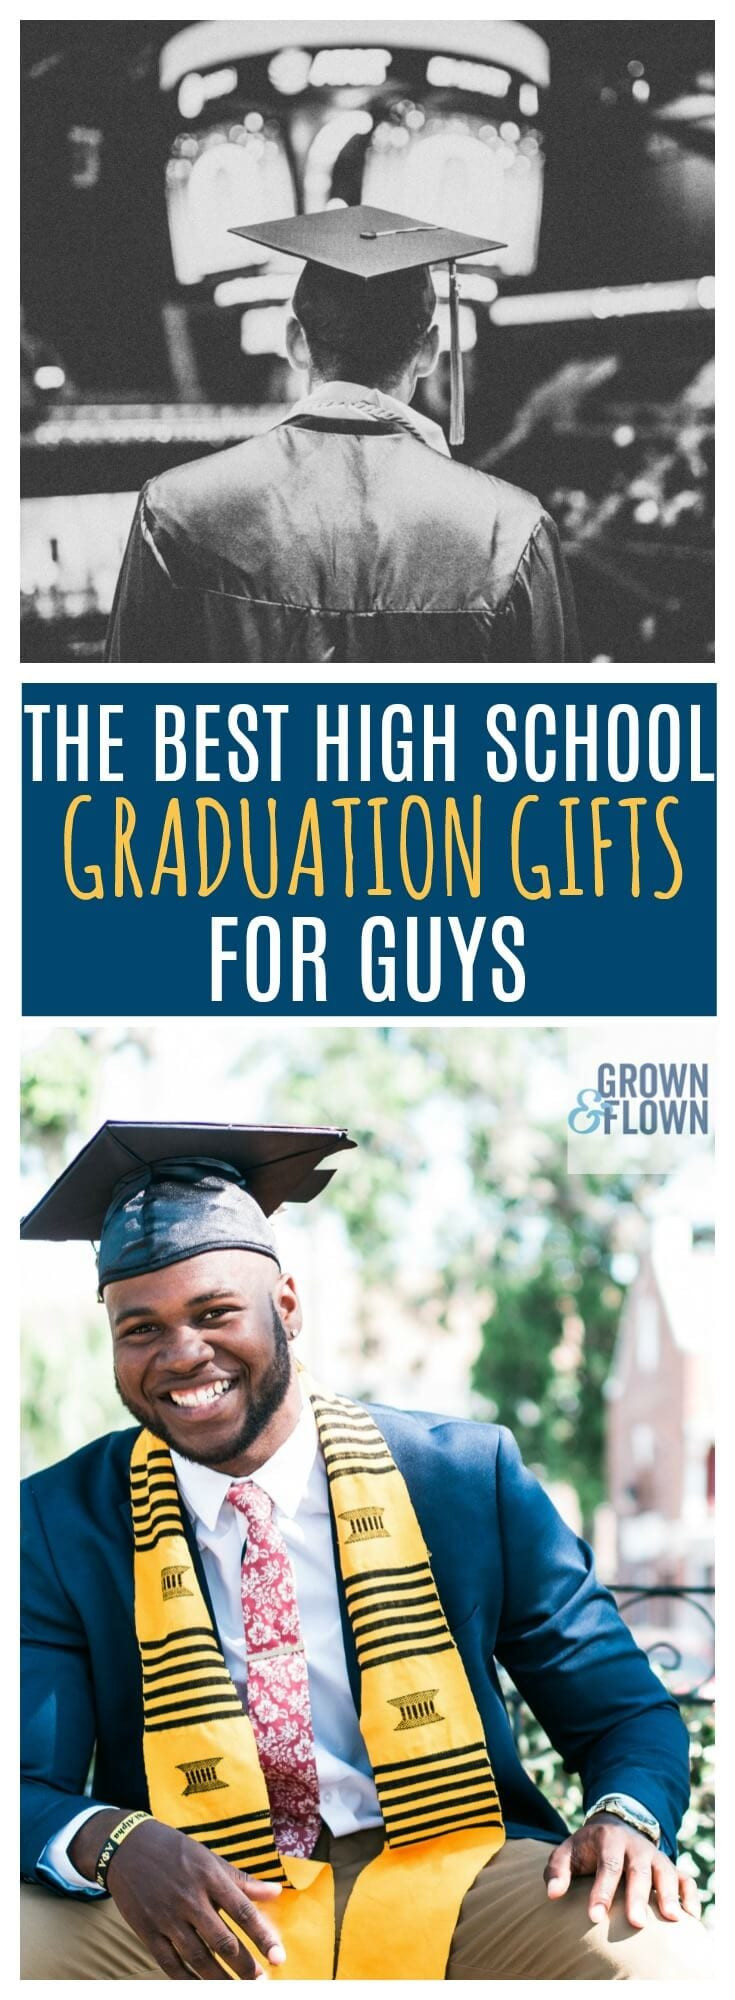 Best College Graduation Gift Ideas
 2020 High School Graduation Gifts for Guys They Will Love